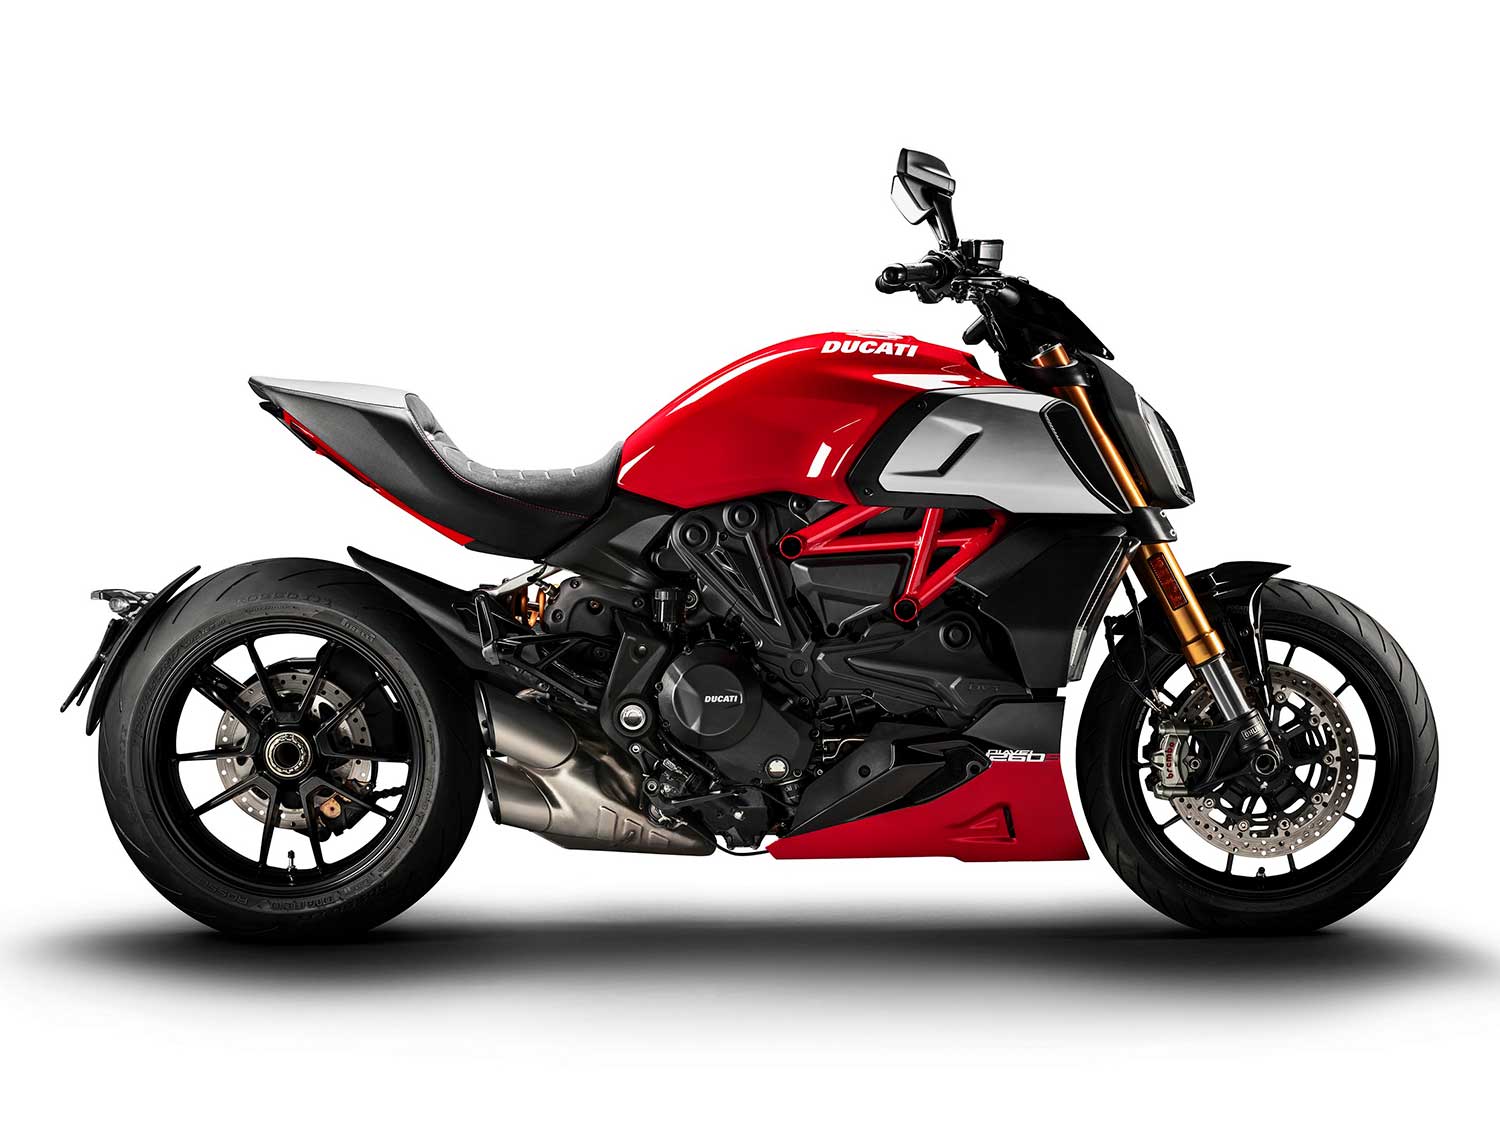 The up-spec 1260 S has a 48mm, fully adjustable Öhlins inverted fork as well as upgraded brakes and for 2020, comes in this new Ducati Red with white trim color option.